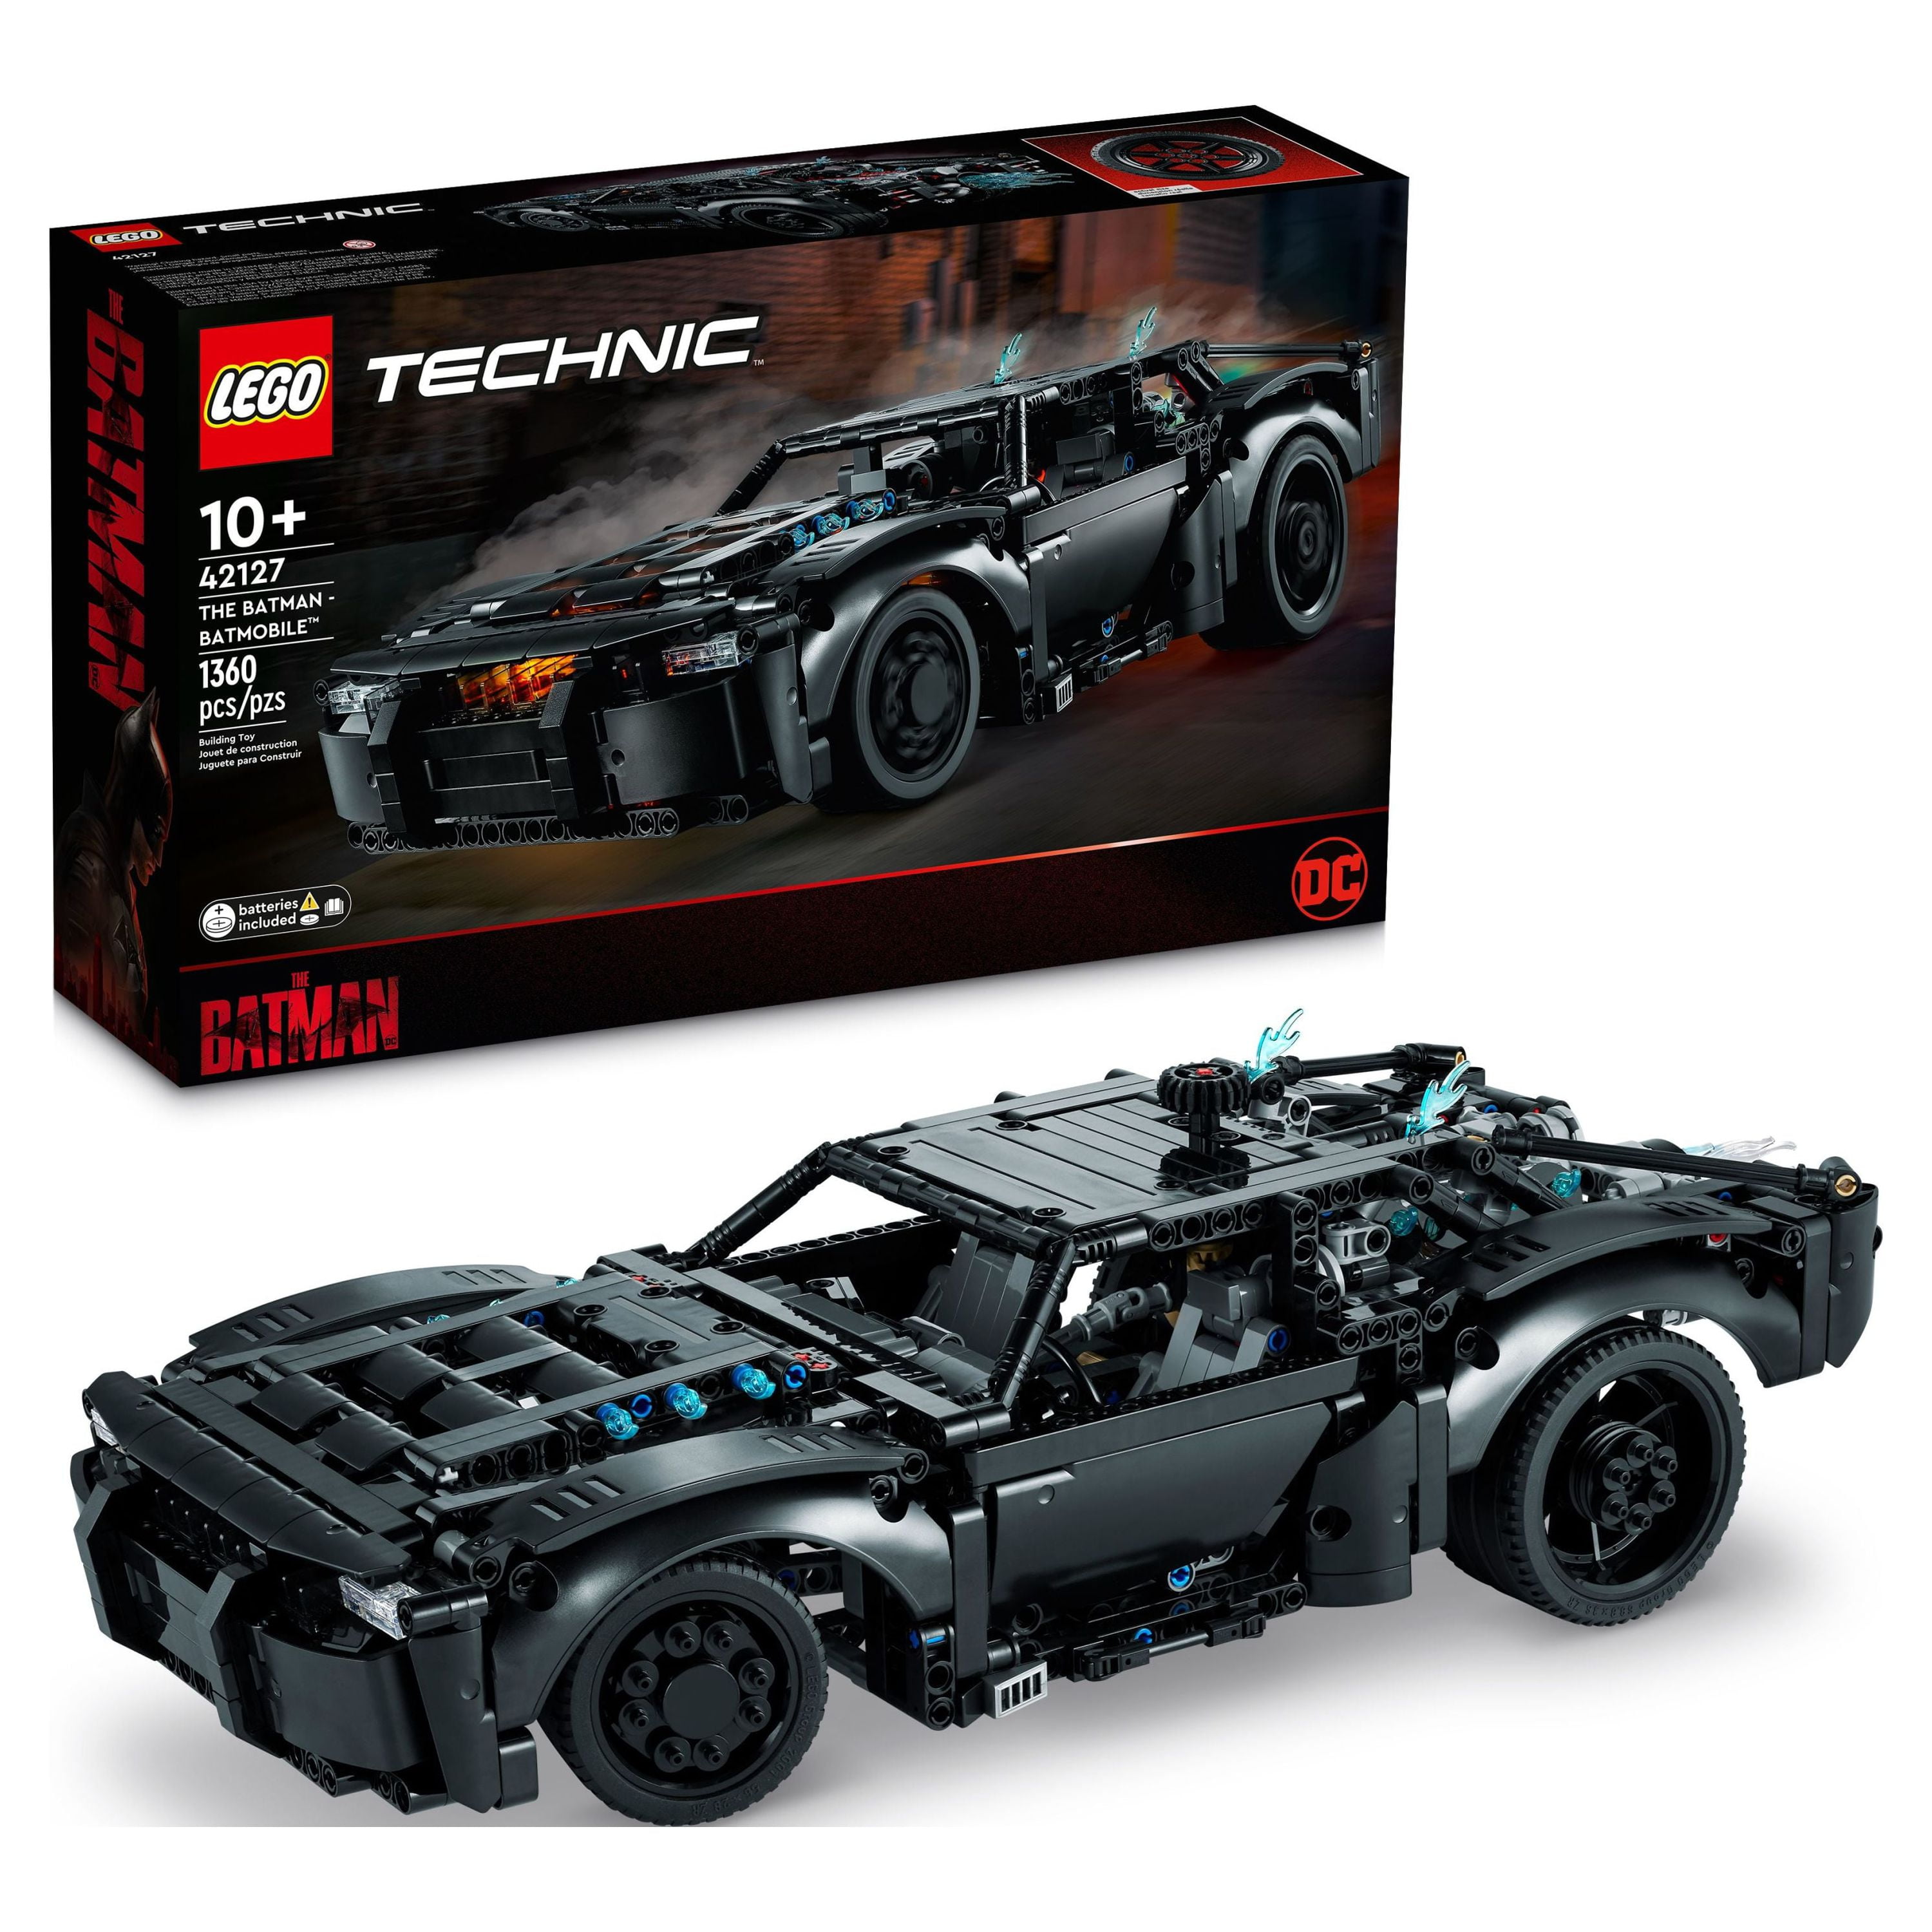  LEGO Technic Bugatti Bolide Racing Car Building Set - Model and  Race Engineering Toy for Back to School, Collectible Sports Car  Construction Kit for Boys, Girls, and Teen Builders Ages 9+